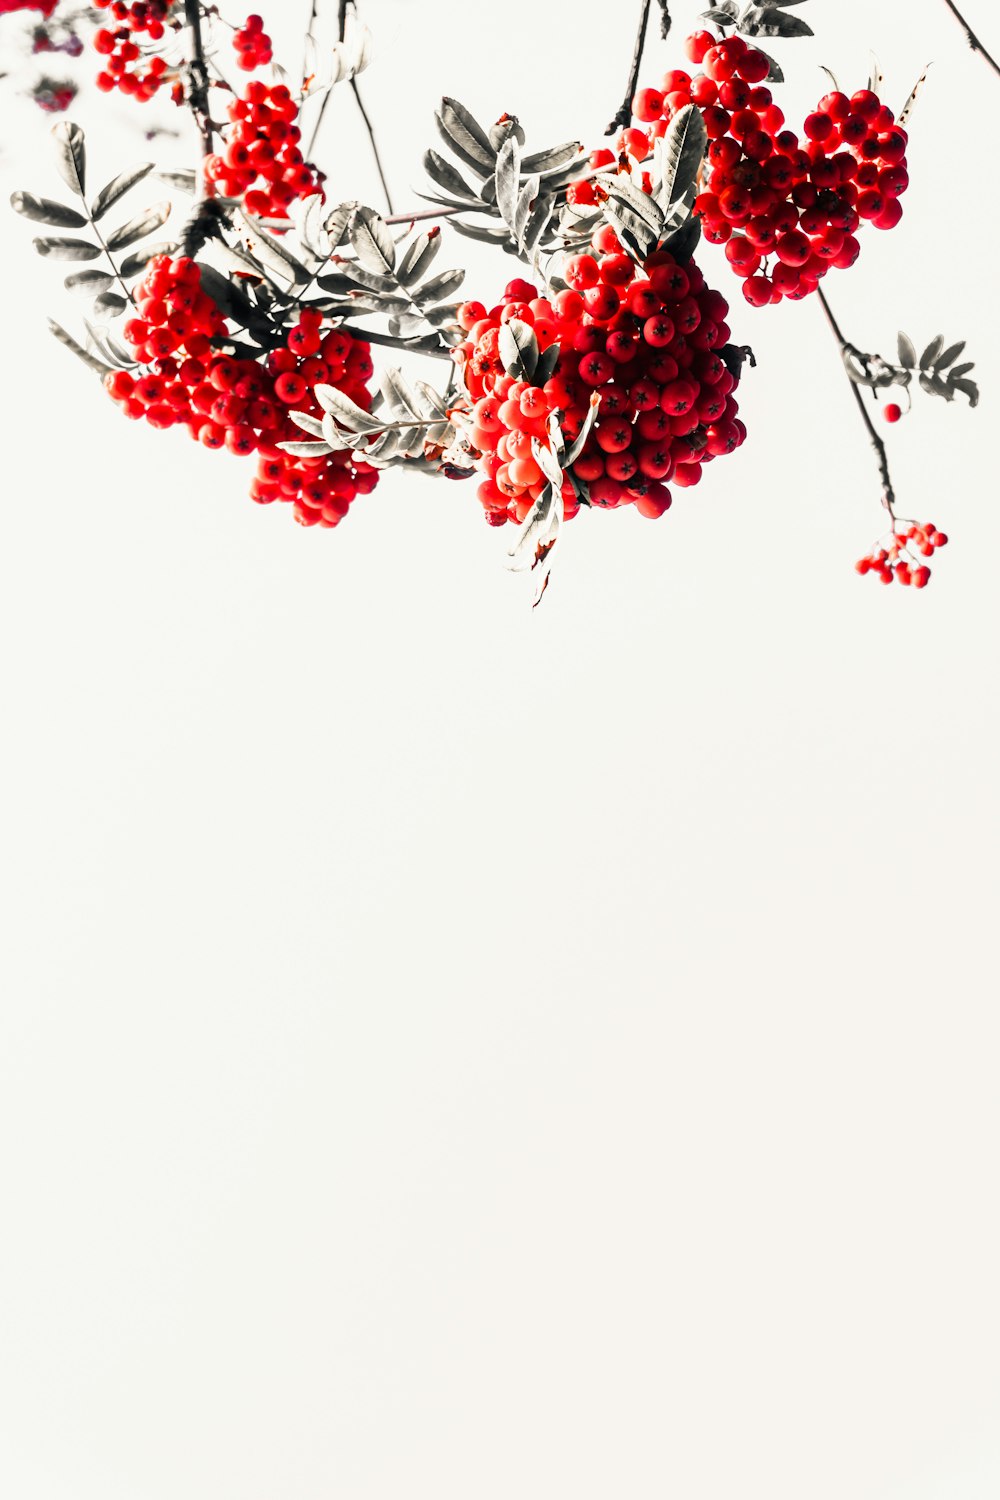 red and green floral illustration